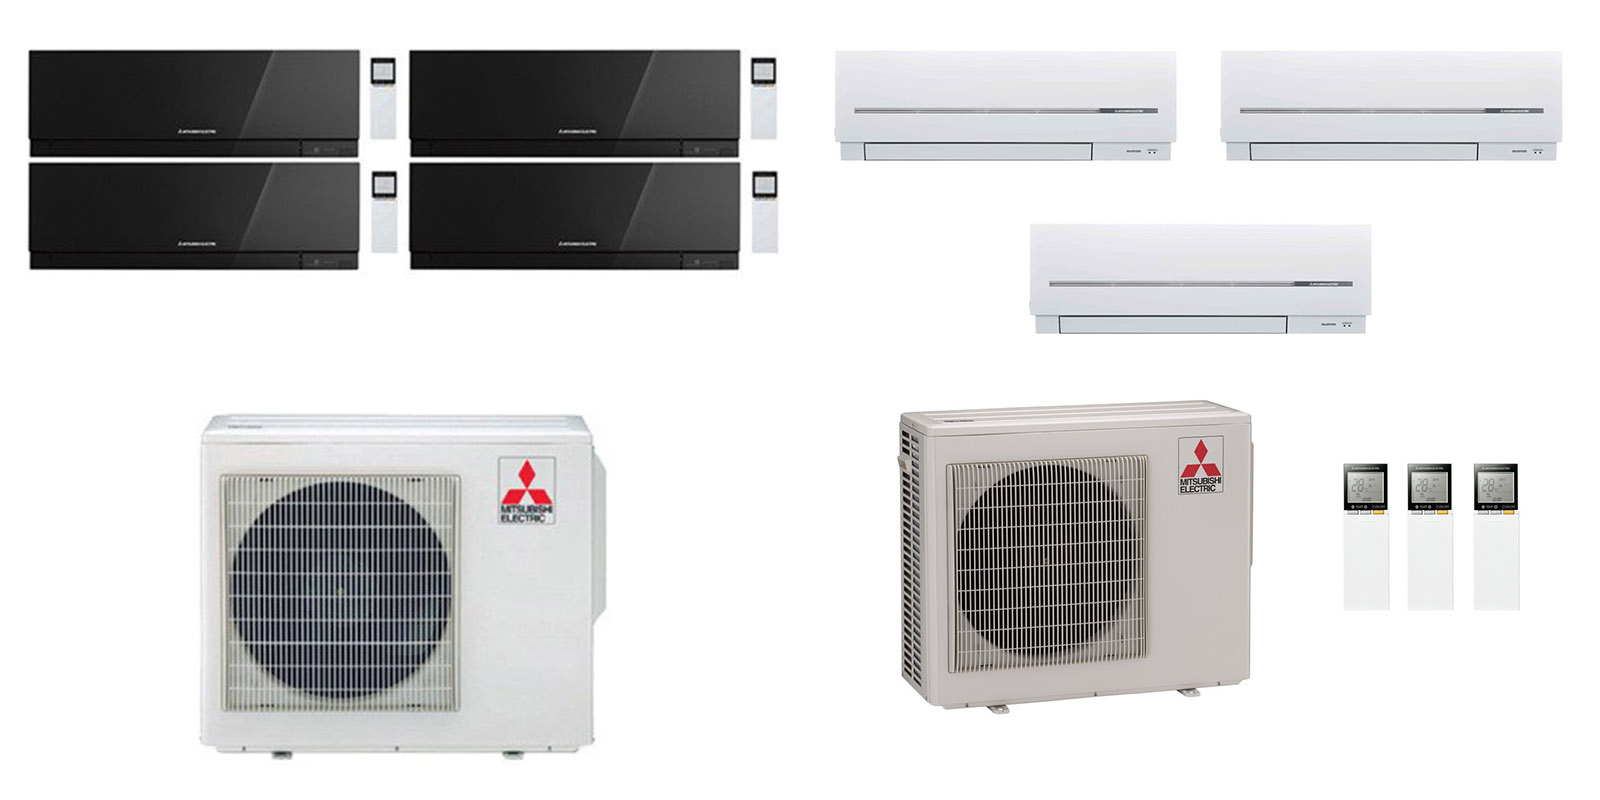 Mitsubishi Electric Air Conditioning MXZ-5D102VA 4 x 2.2 kW + 1 x 7.1 kw Multi Wall Air Conditioning A 240V~50Hz